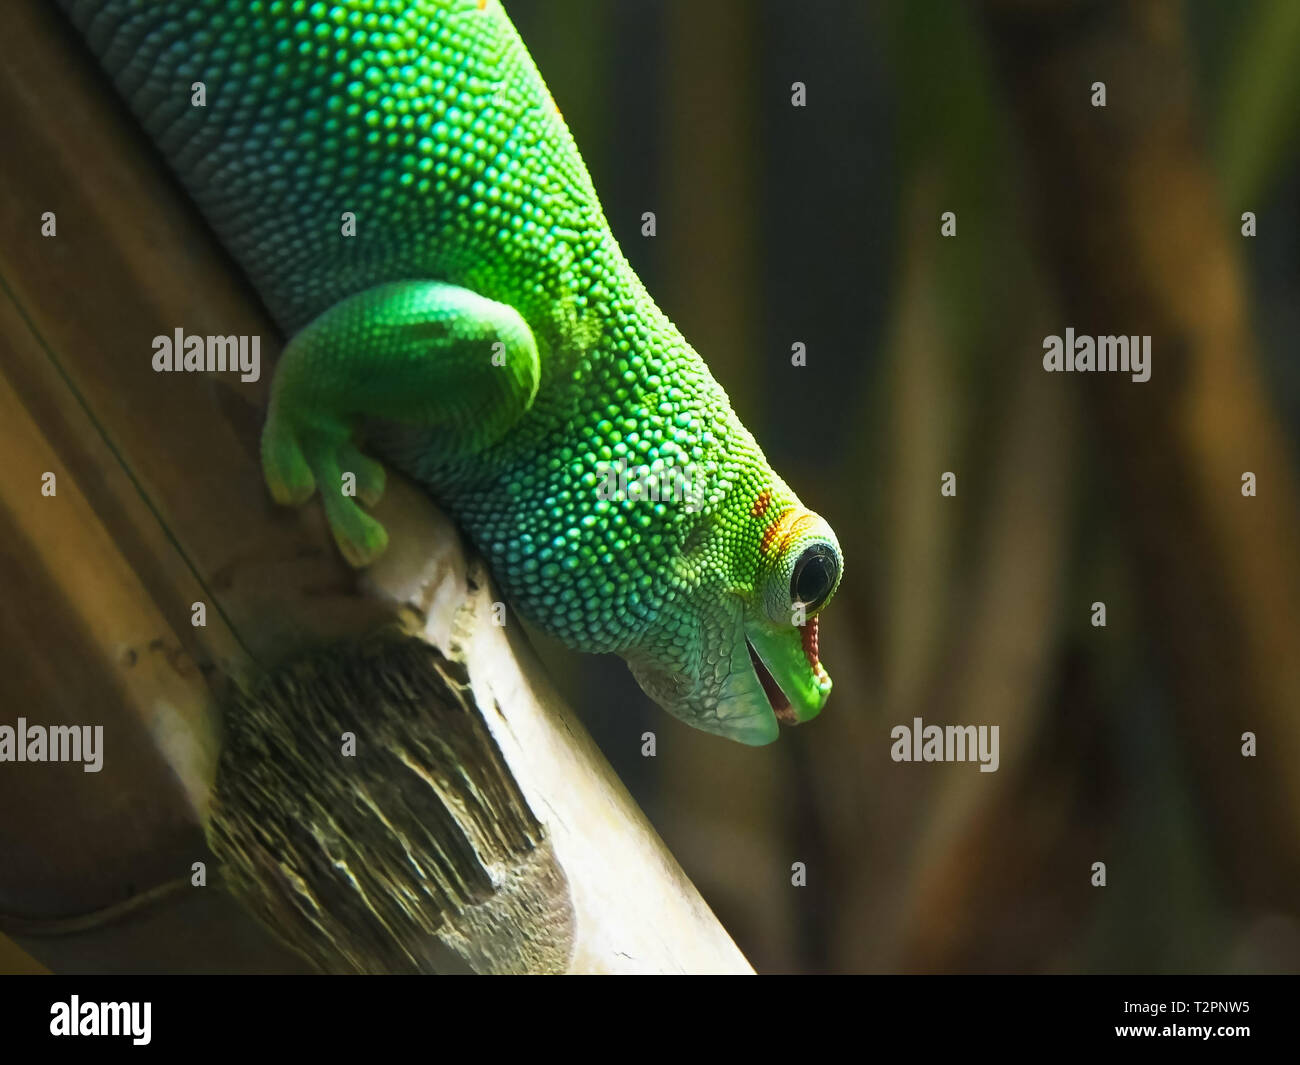 a madagascar giant day gecko on a bamboo stem Stock Photo